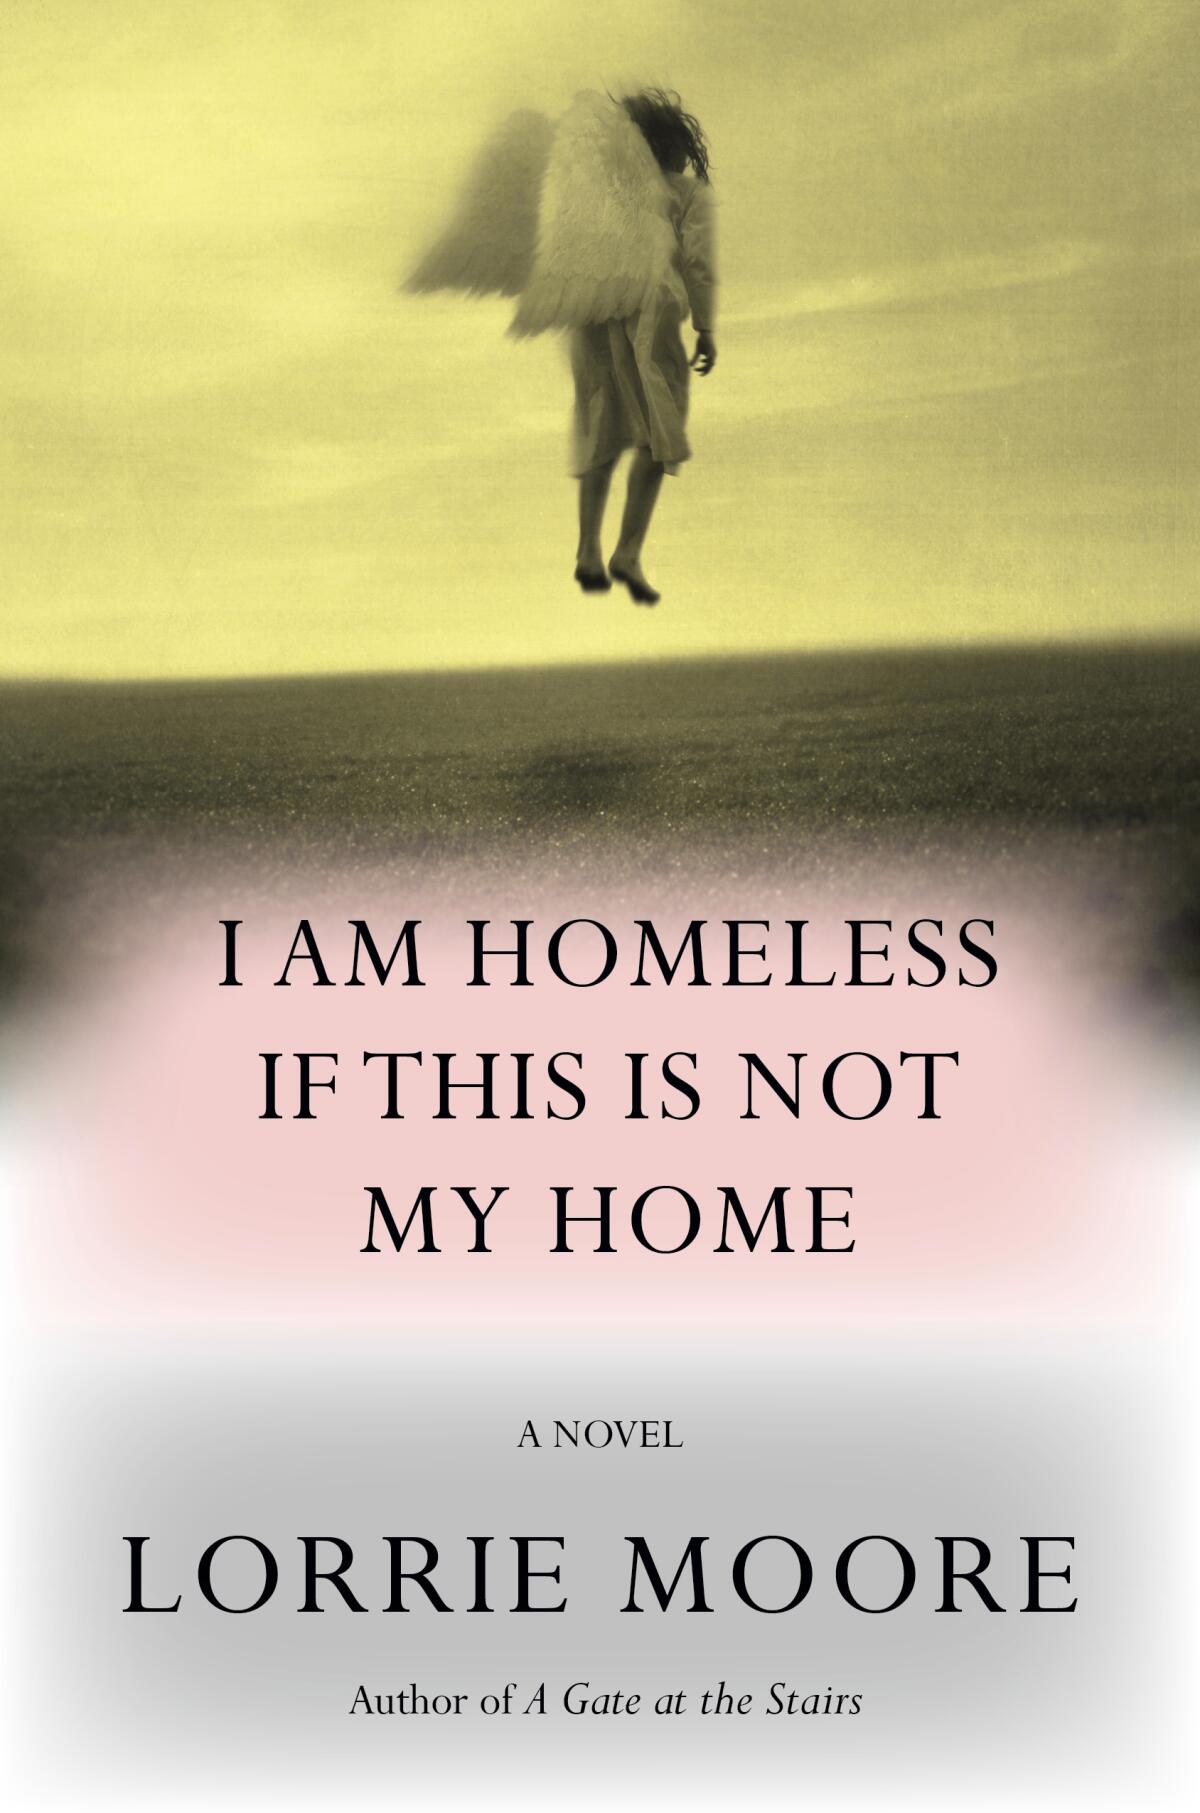 book cover for 'I Am Homeless if This is Not My Home,' has an angel with wings floating above the ground